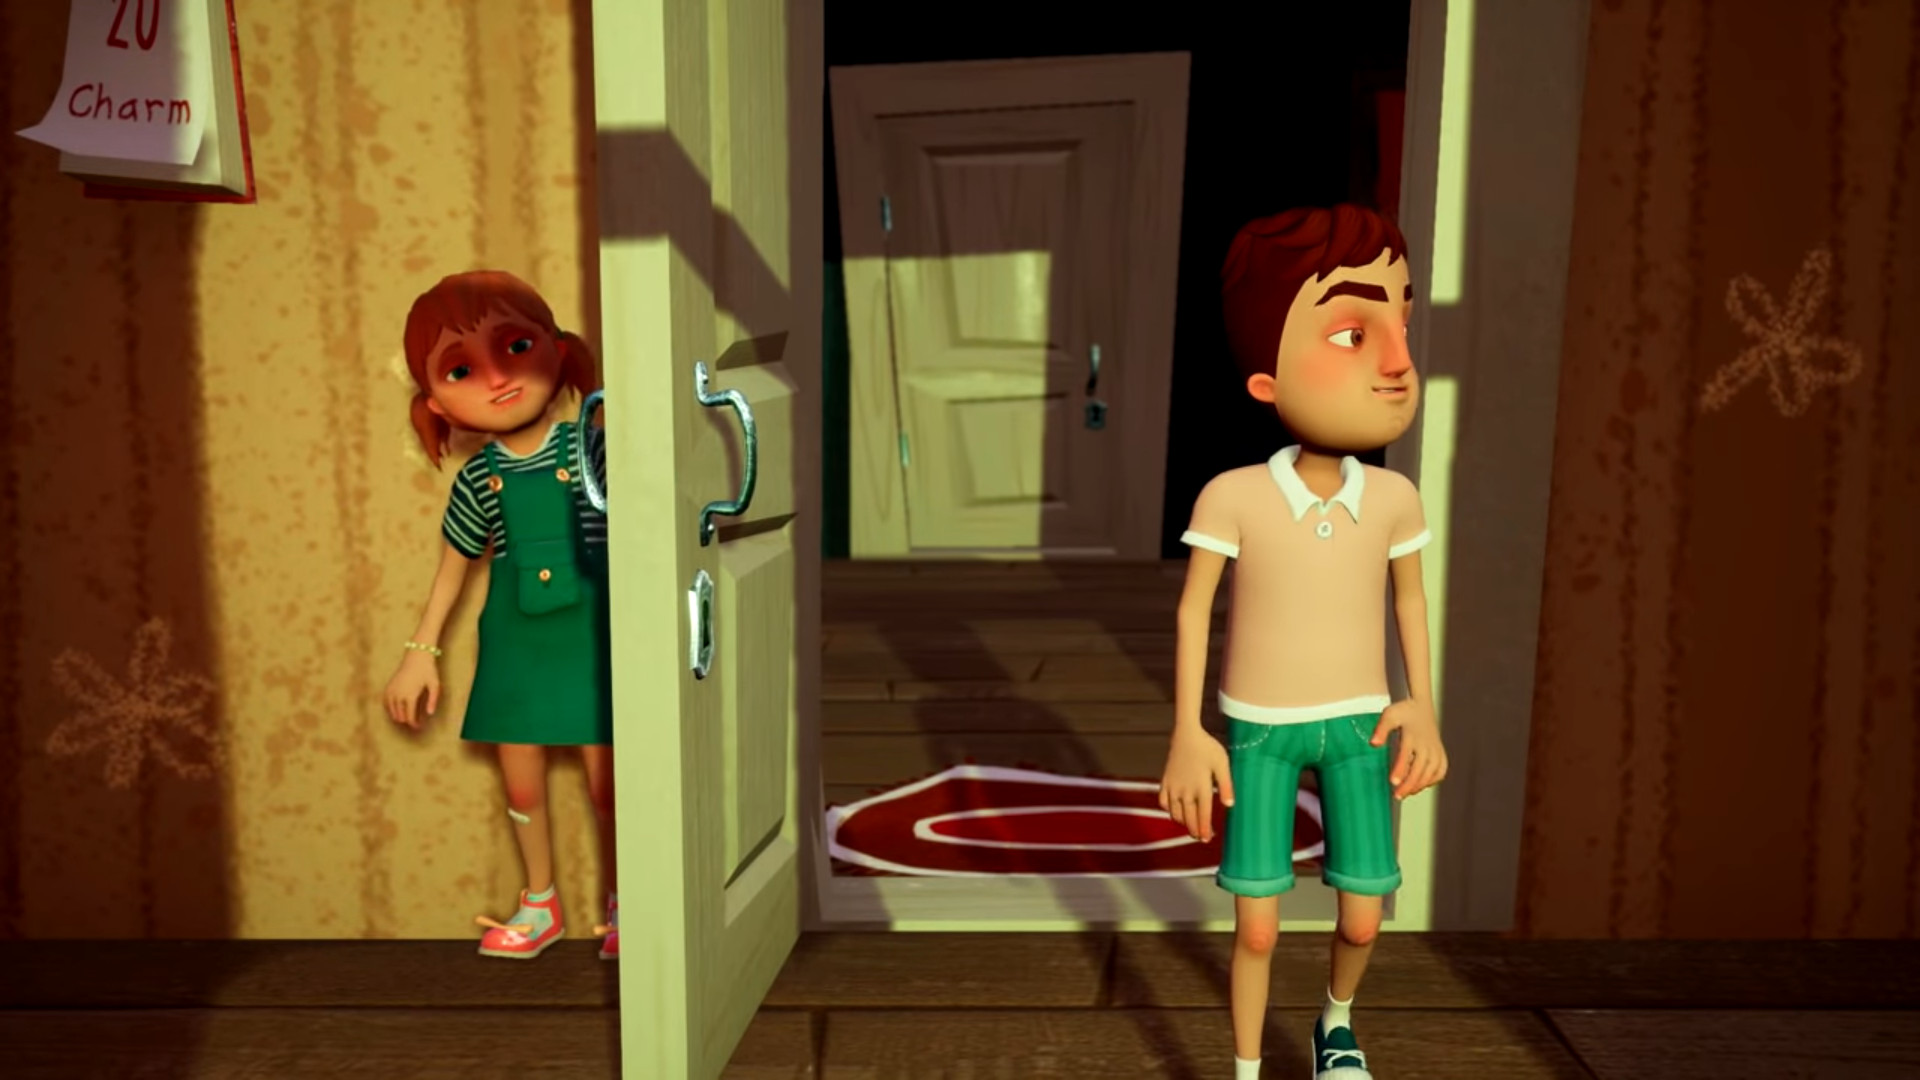 Hello Neighbor: Hide and Seek, the official prequel